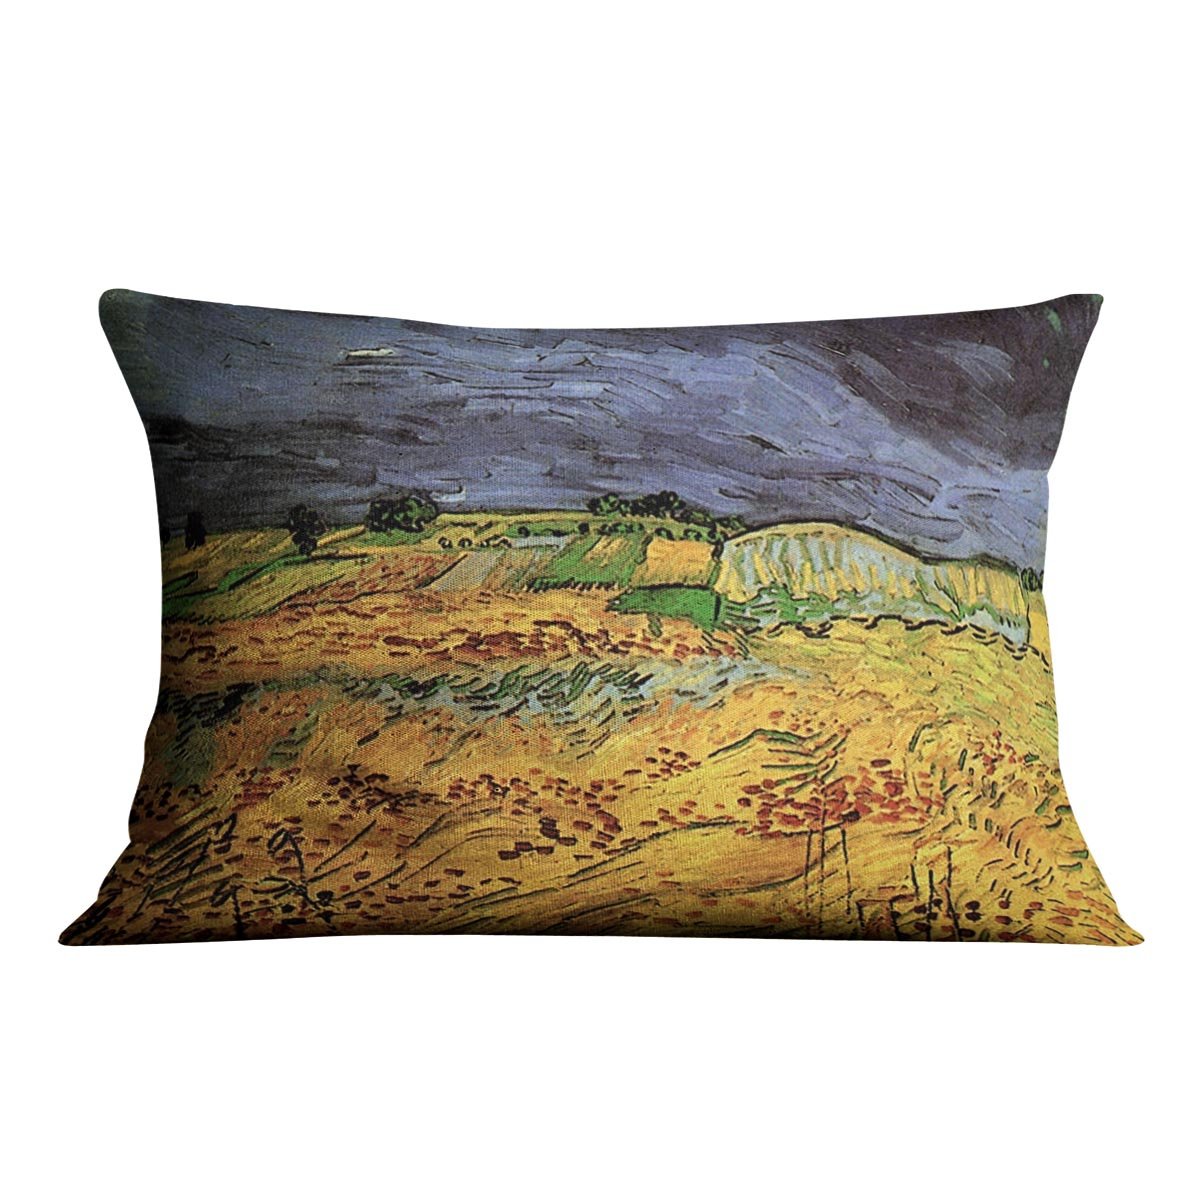 The Fields by Van Gogh Throw Pillow